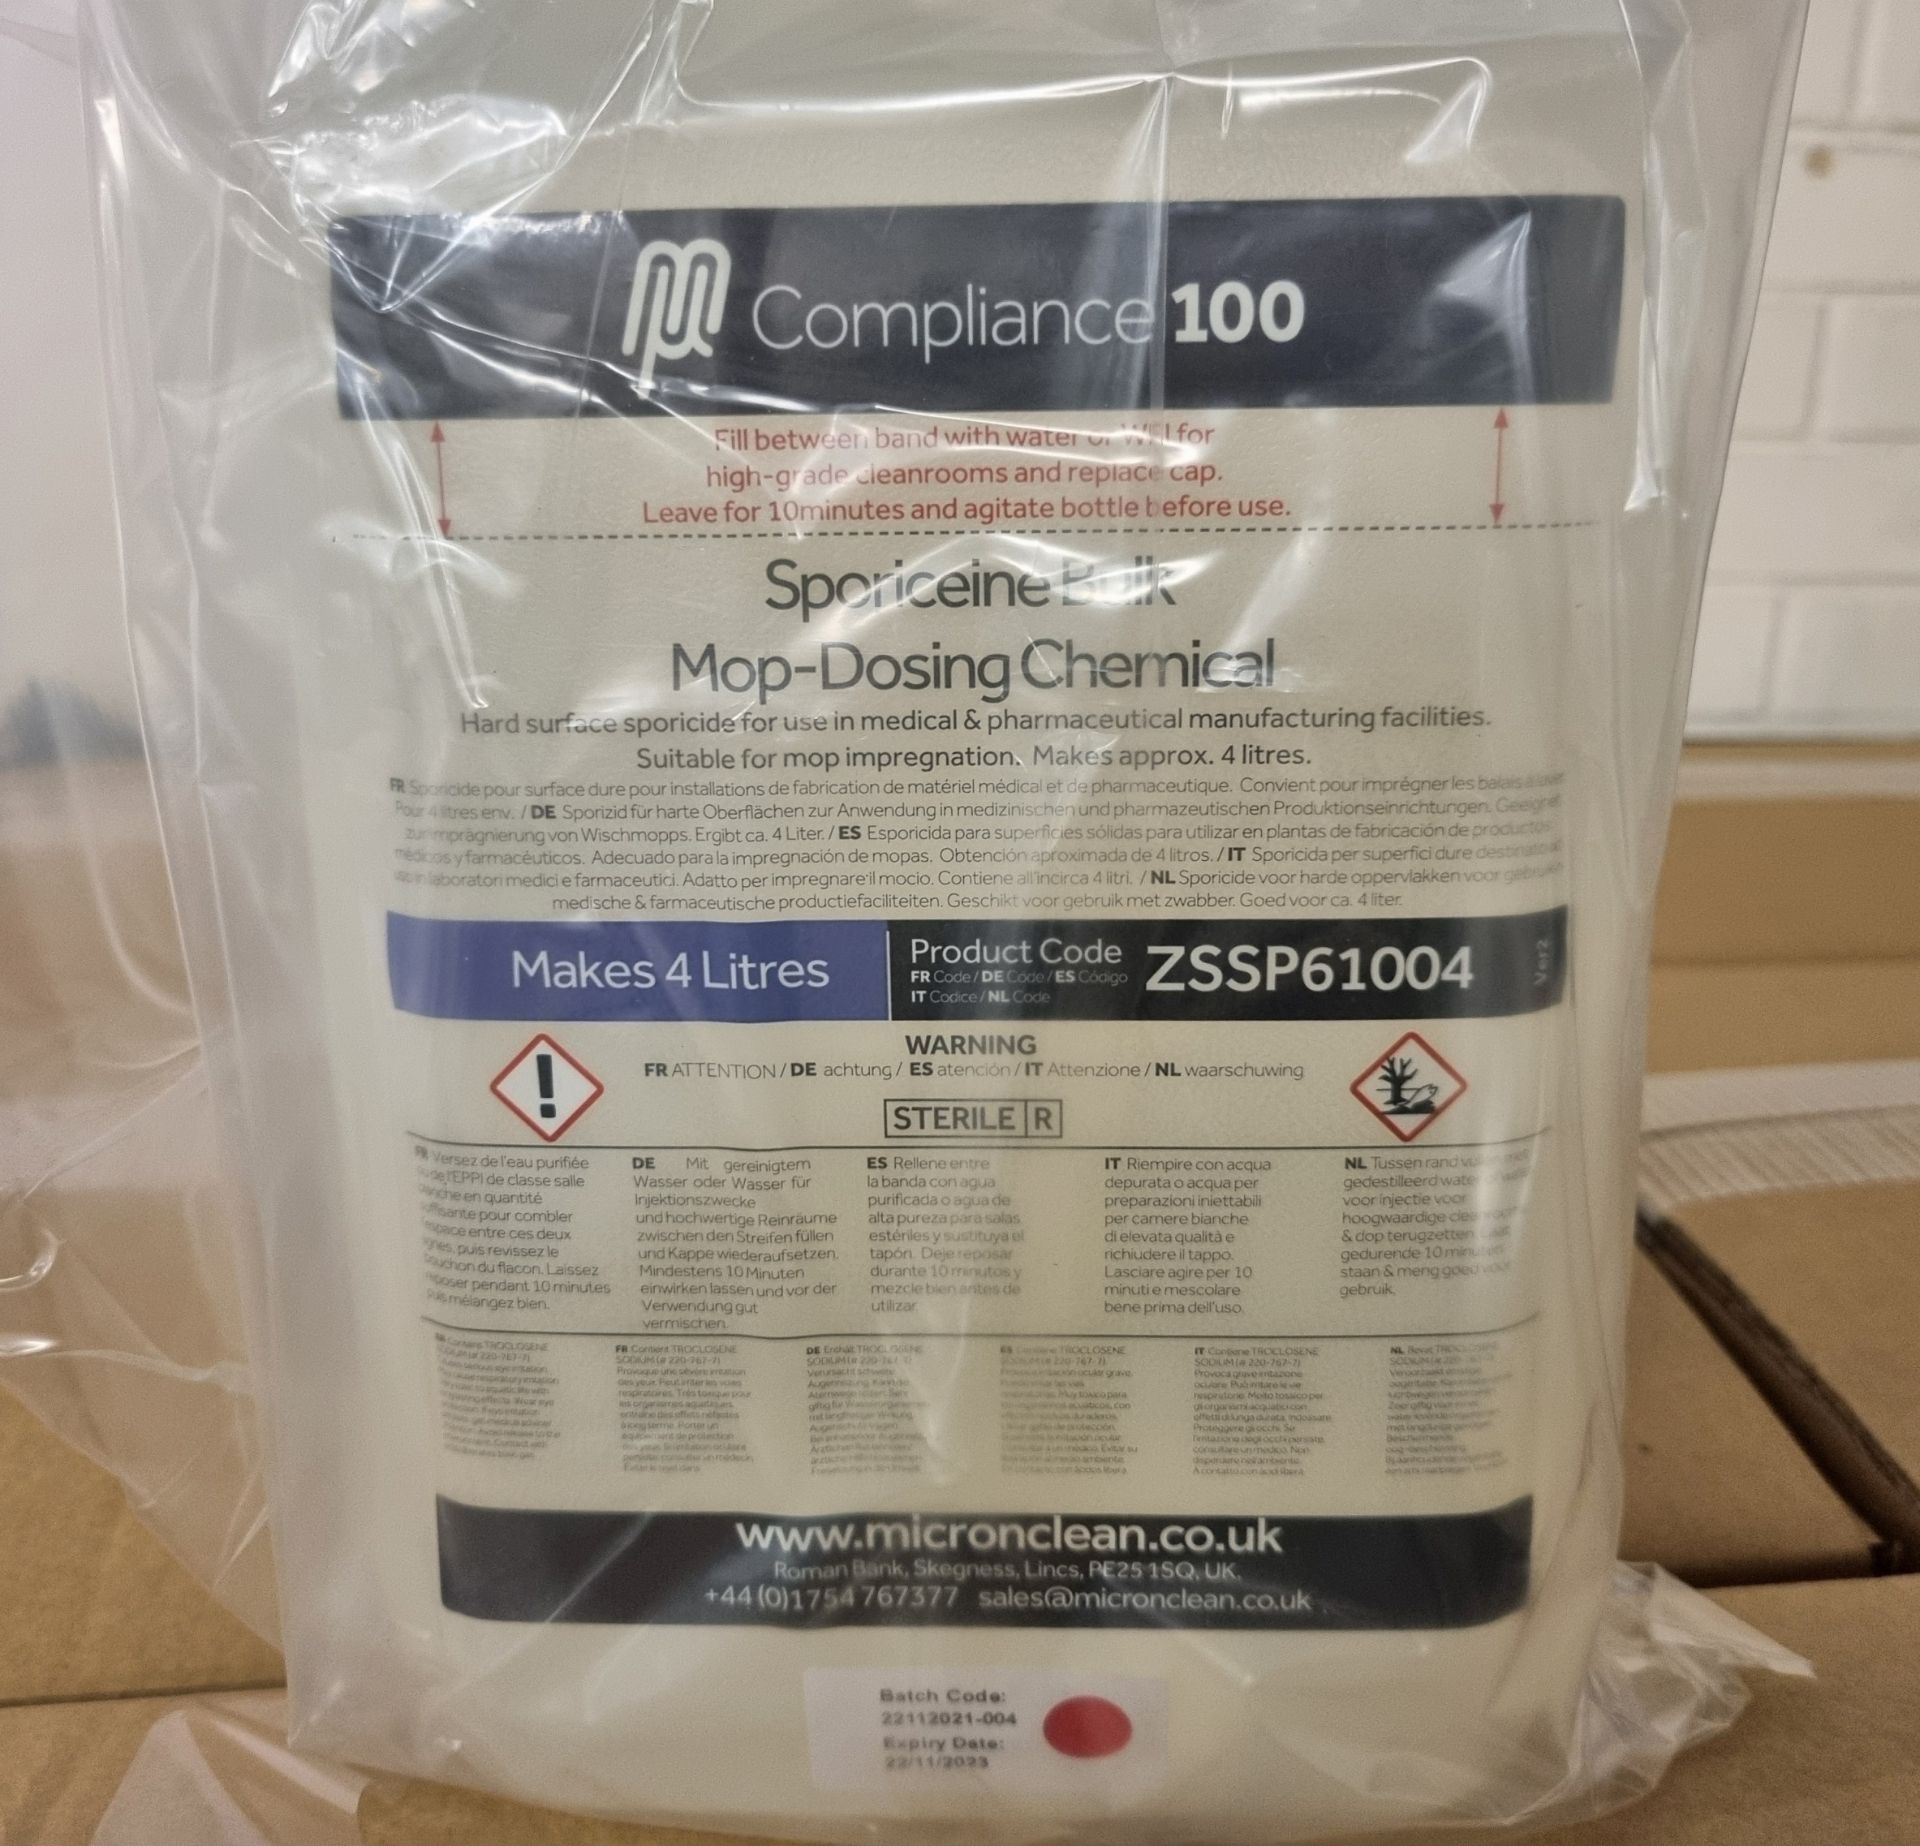 18x boxes of Sporiceine ZSSP61004 mop-dosing chemical - 9 bottles x 4 litre per box - Image 2 of 3